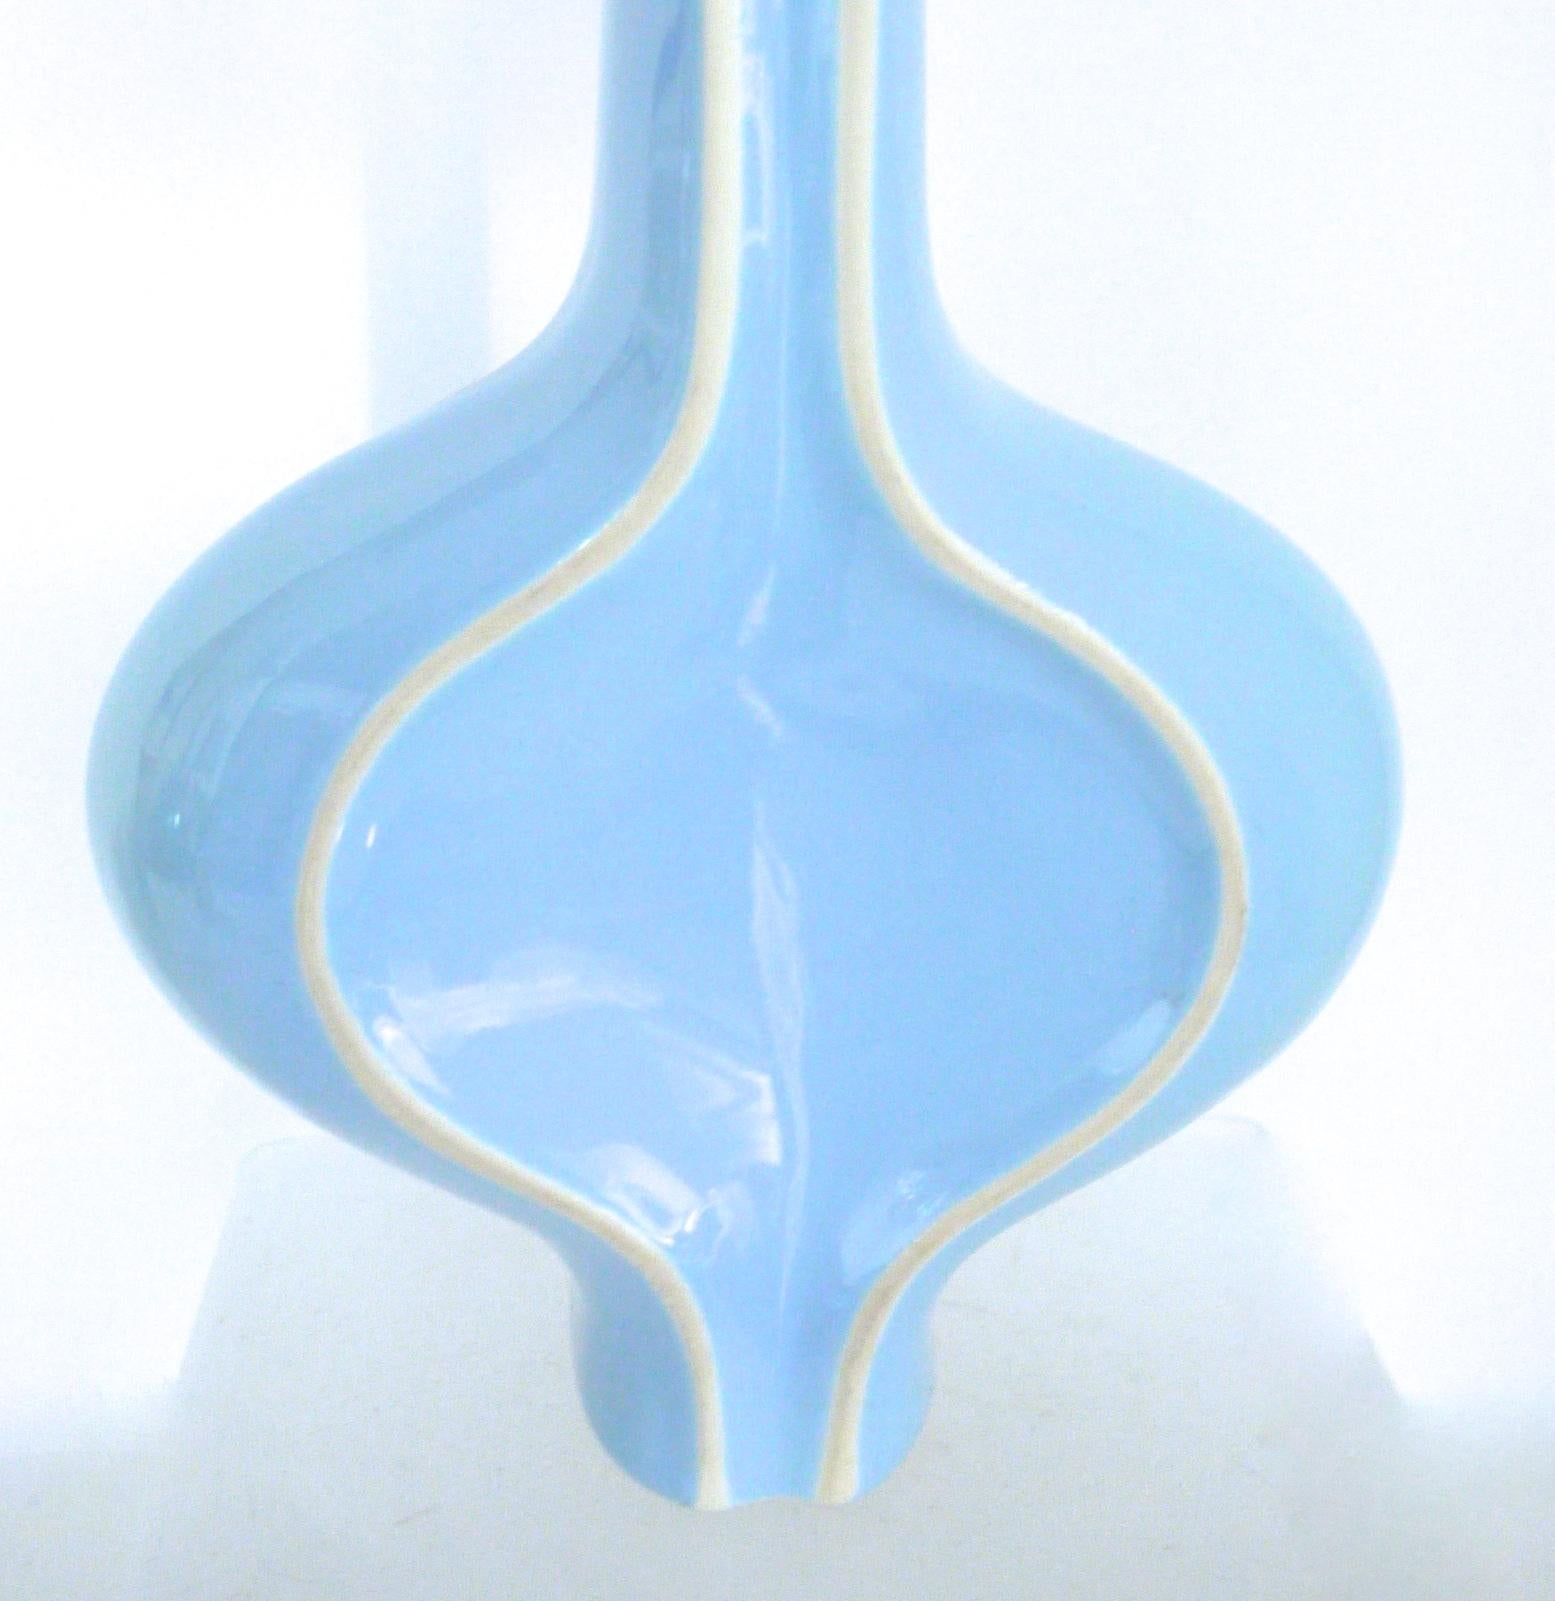 Sought after, Space Age China Swallow Vase by Scabetti Dominic Bromley, 2002 UK For Sale 1